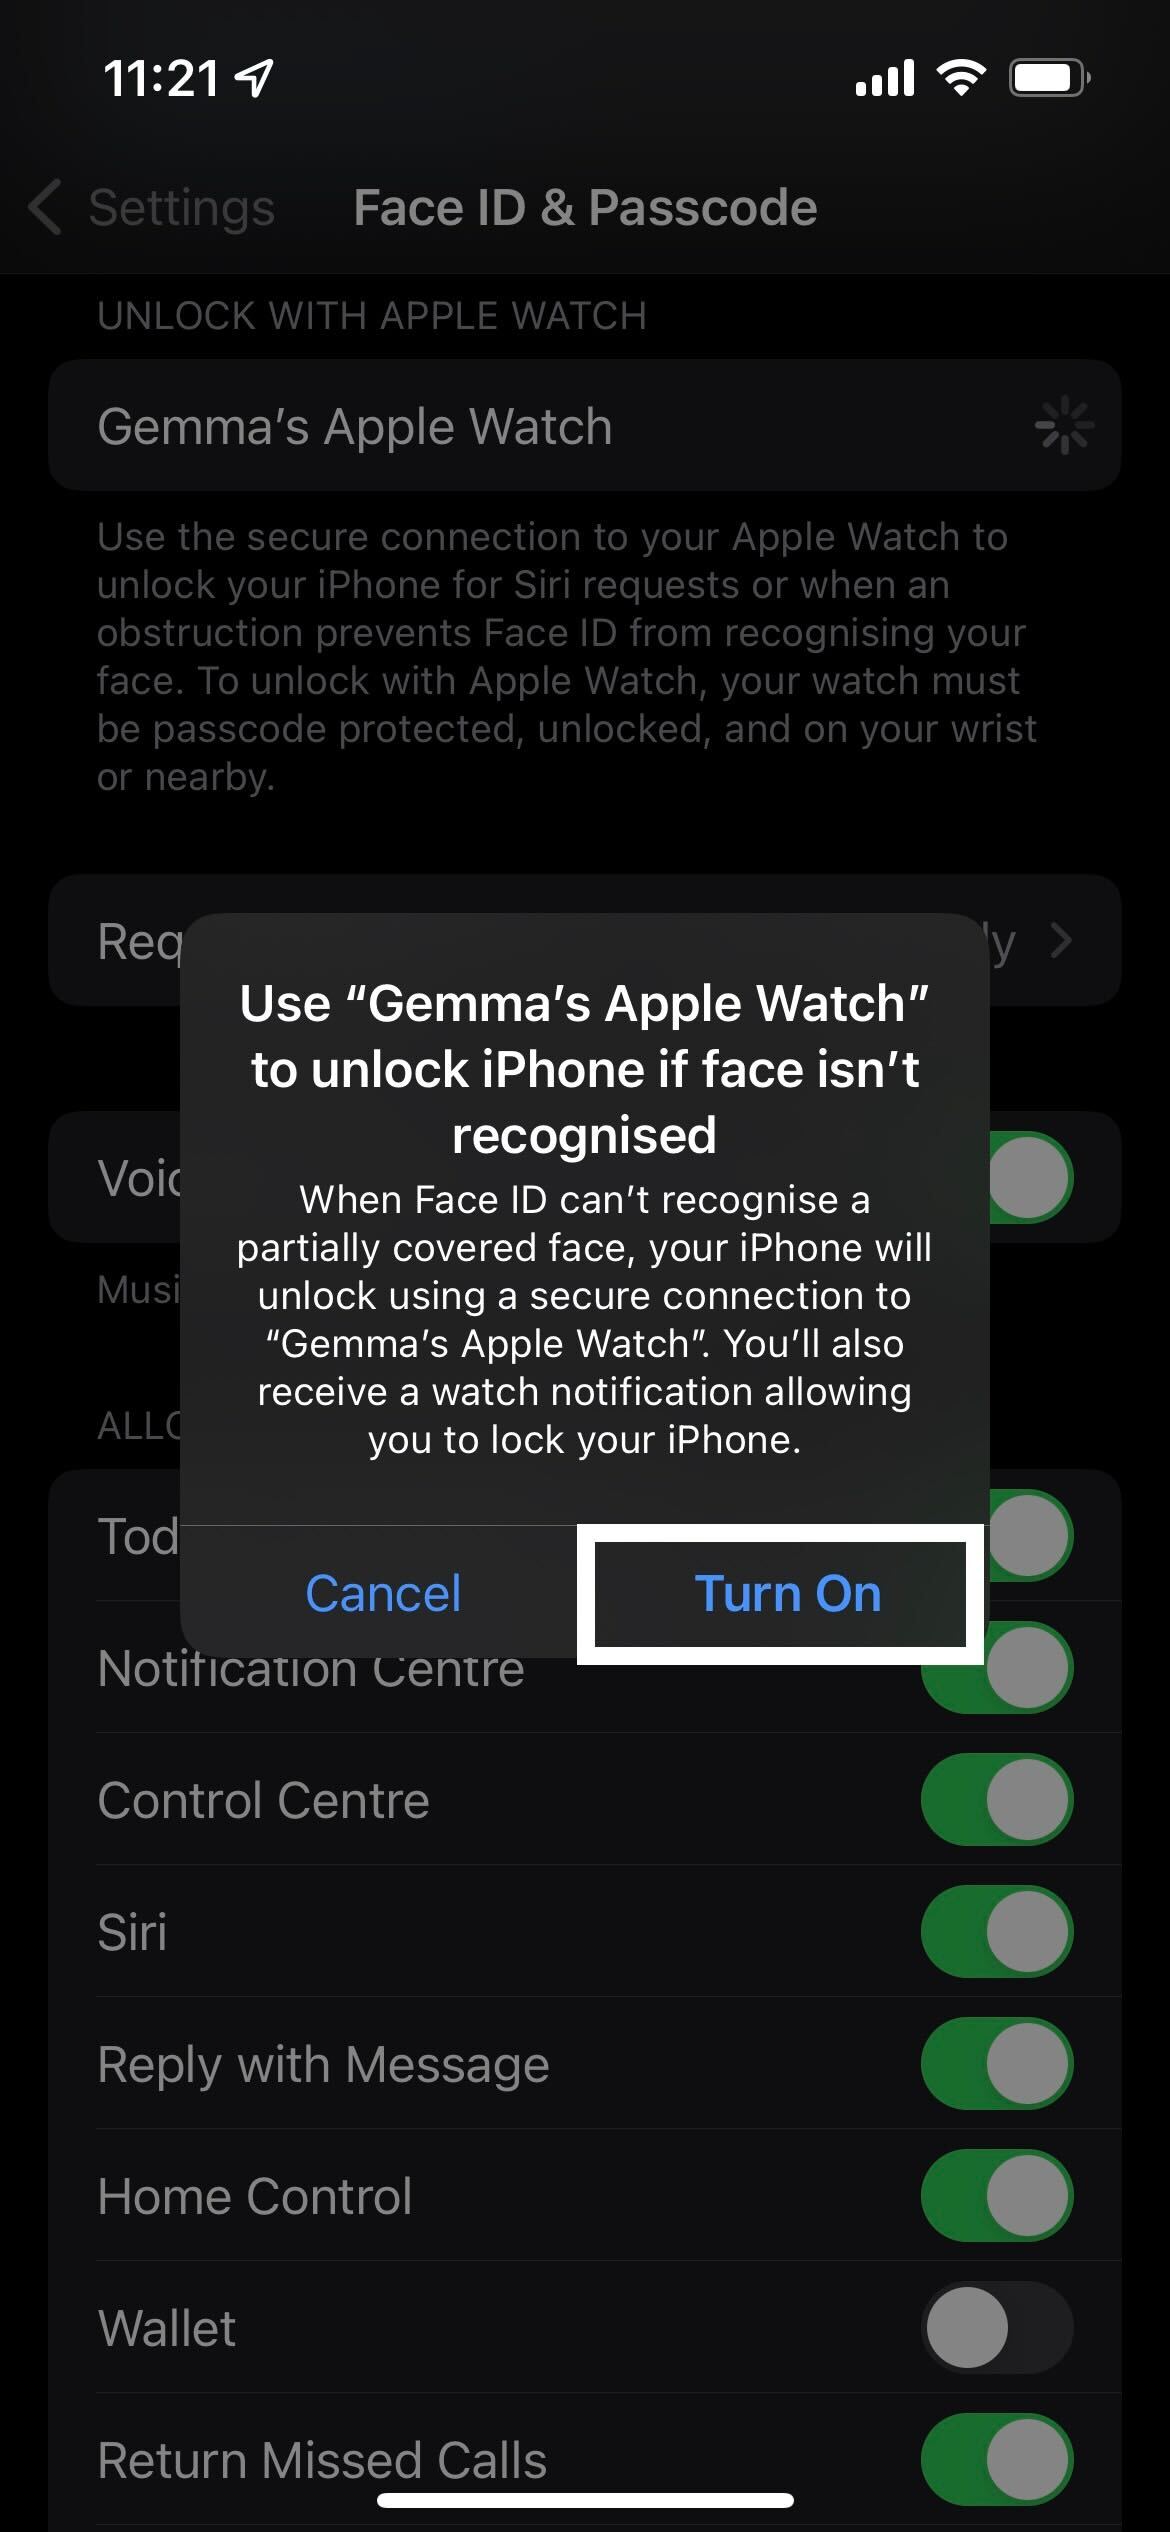 Turn on unlock with Apple Watch button in iOS